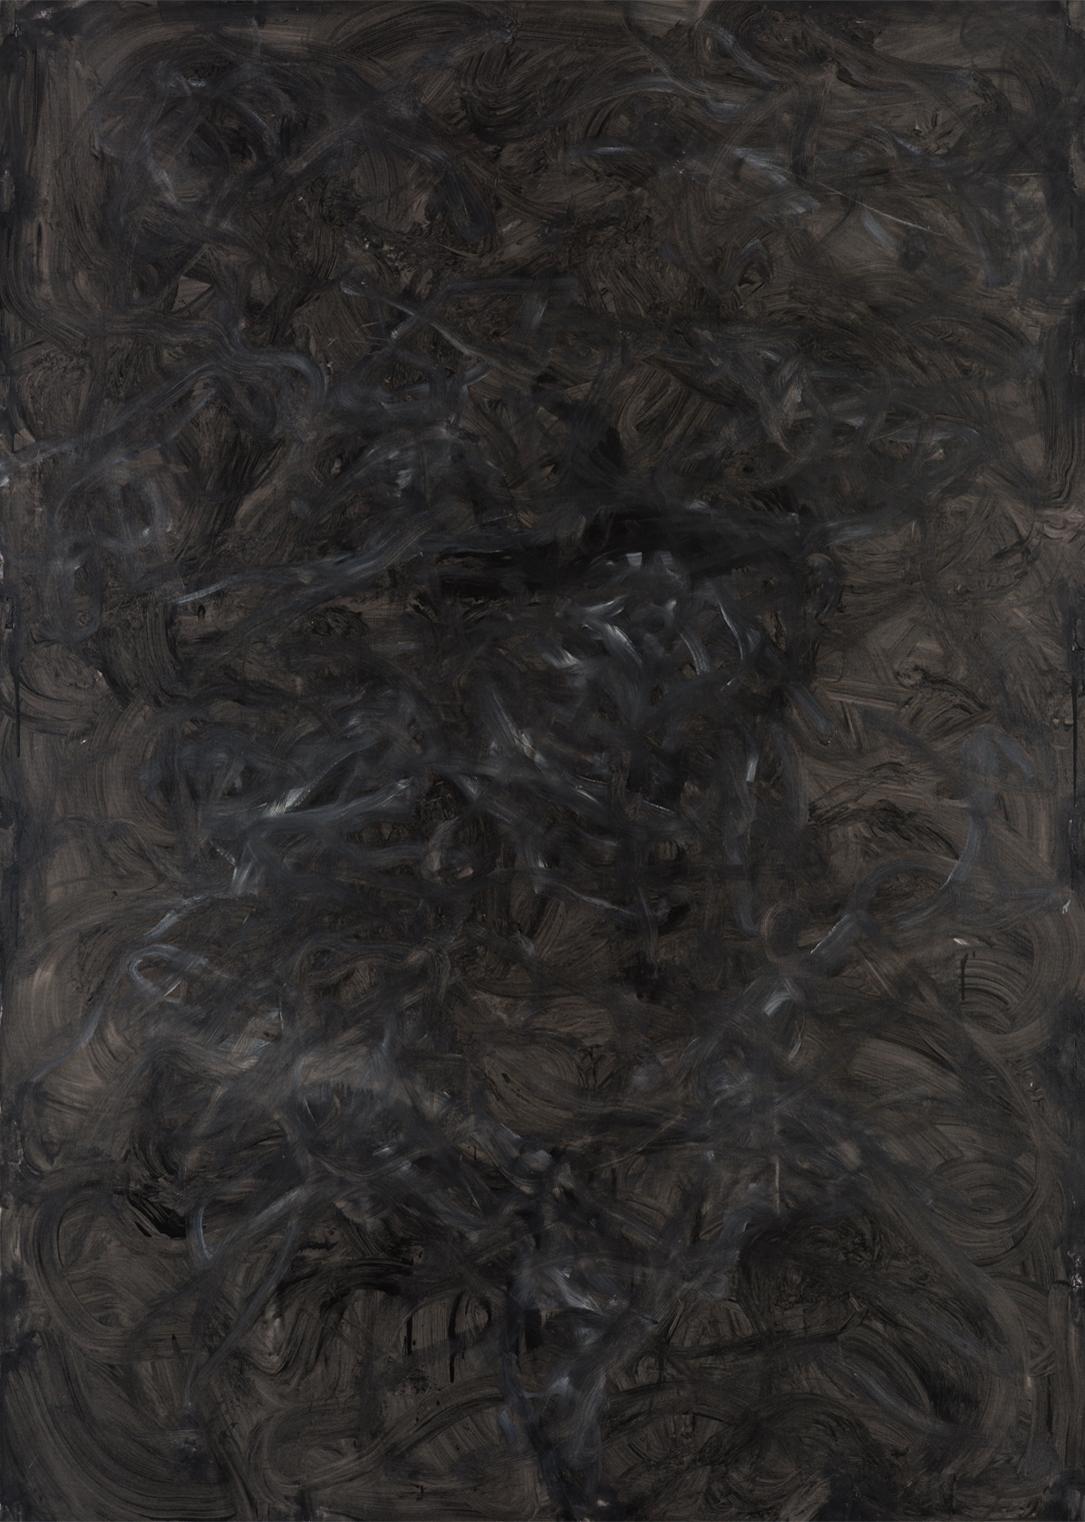 Zsolt Berszán Abstract Painting - Untitled 019 [Remains of the Remains 019] -Contemporary Art, Abstract, Black